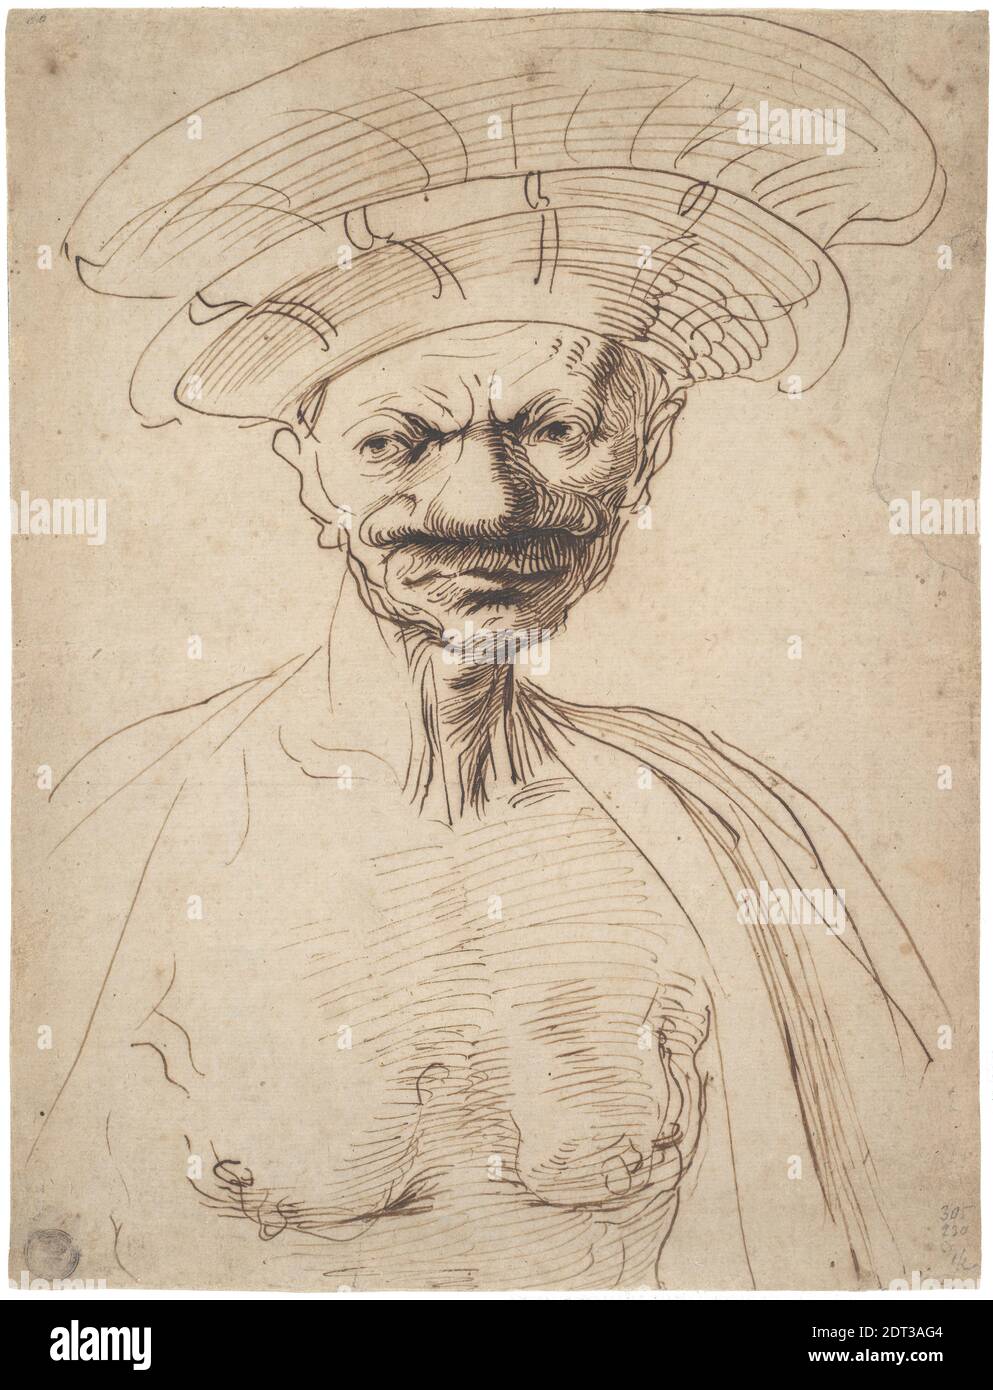 Artist: Guercino (Giovanni Francesco Barbieri), Italian, 1591–1666, Caricature of a Man Wearing a Large Hat, ca. 1630–40, Pen and brown ink, sheet: 30.4 × 23 cm (11 15/16 × 9 1/16 in.), Italian, 17th century, Works on Paper - Drawings and Watercolors Stock Photo